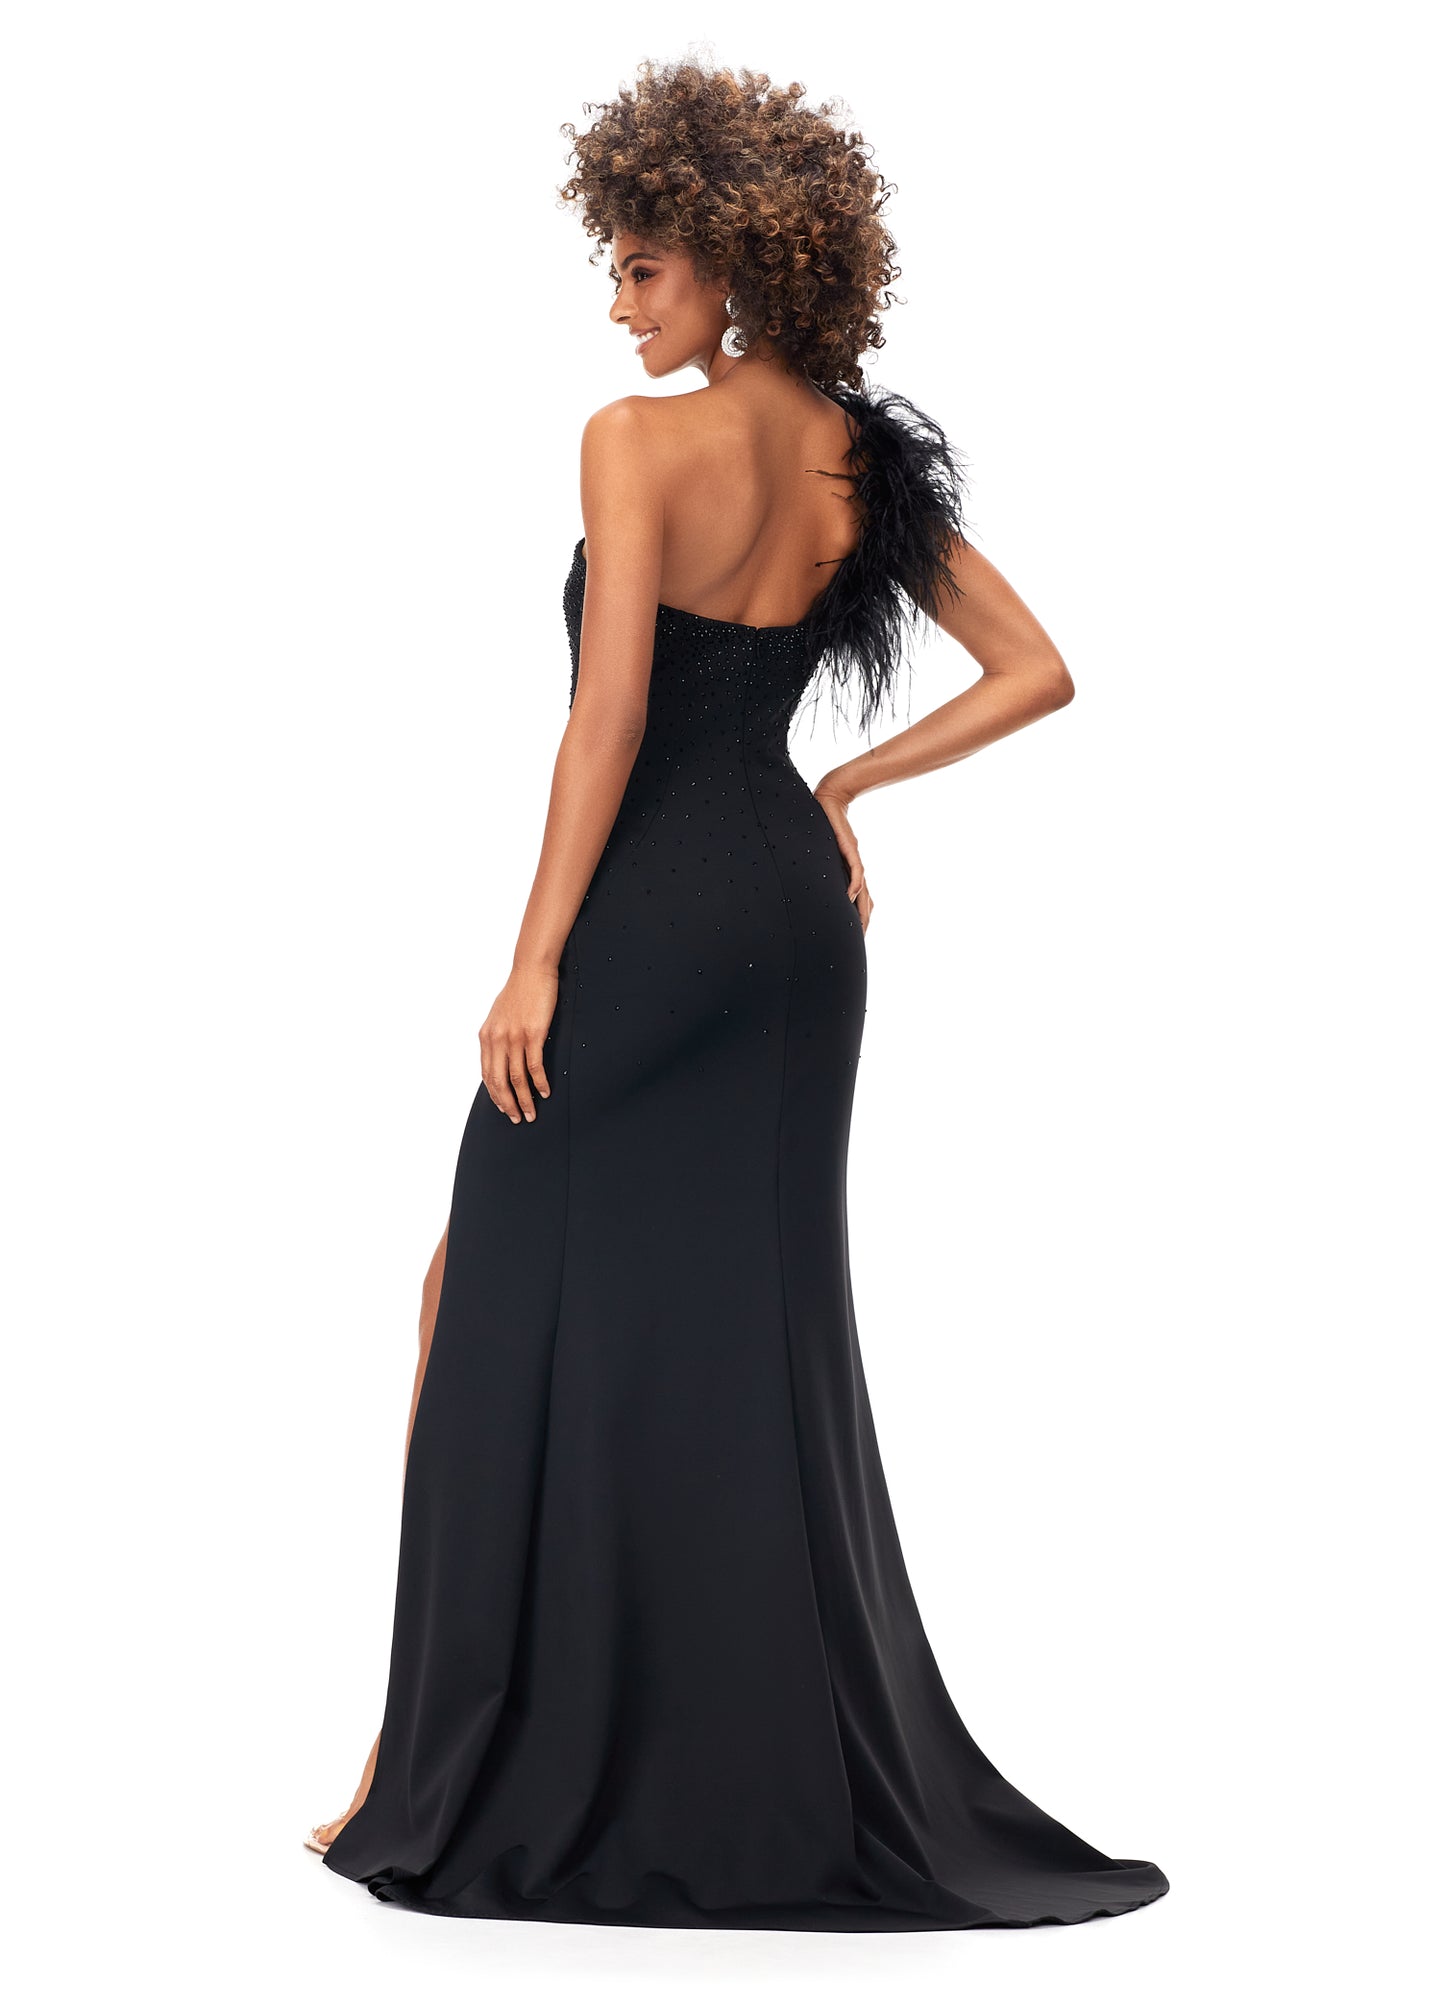 Ashley Lauren 11290 One Shoulder Prom Dress crystal top one shoulder with feathers